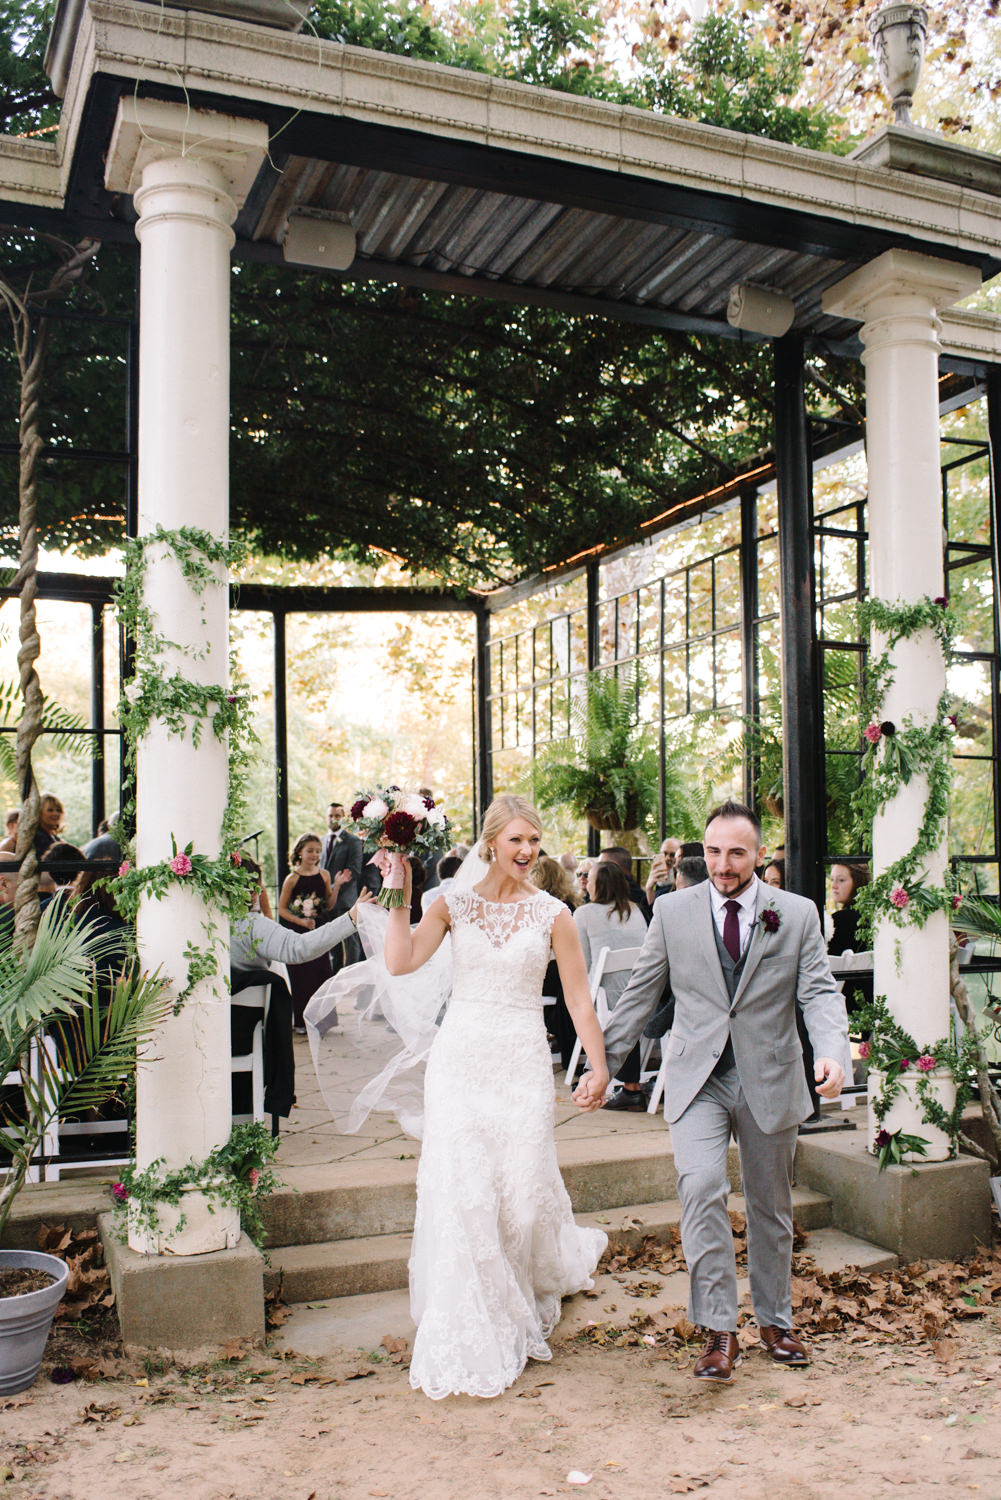 Best Wedding Venues In St Louis of all time Check it out now 